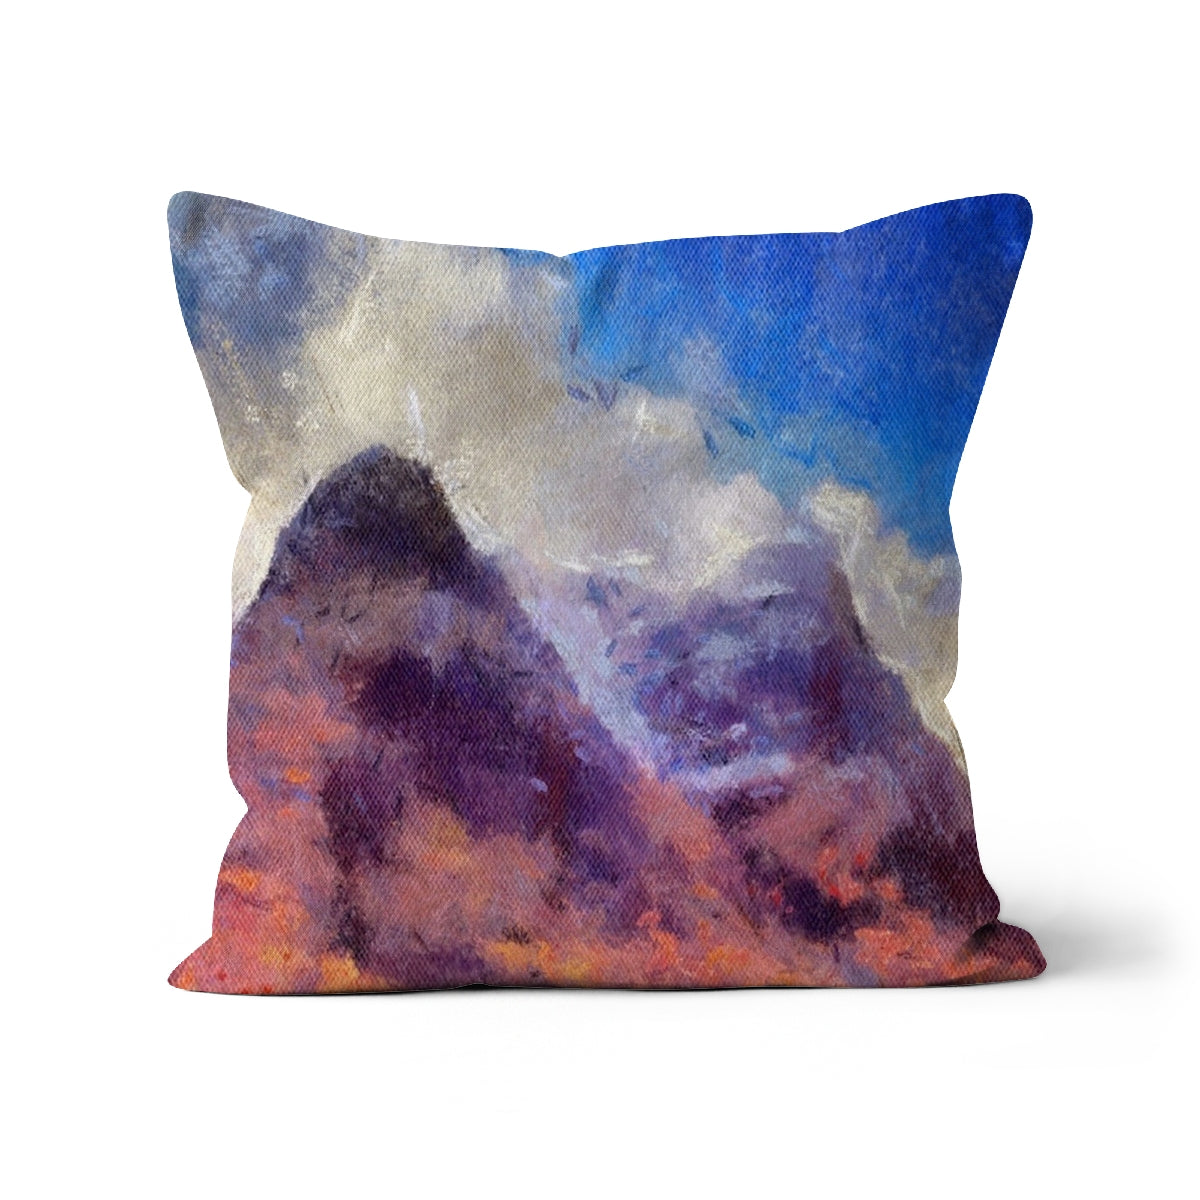 Glencoe Art Gifts Cushion-Cushions-Glencoe Art Gallery-Faux Suede-24"x24"-Paintings, Prints, Homeware, Art Gifts From Scotland By Scottish Artist Kevin Hunter